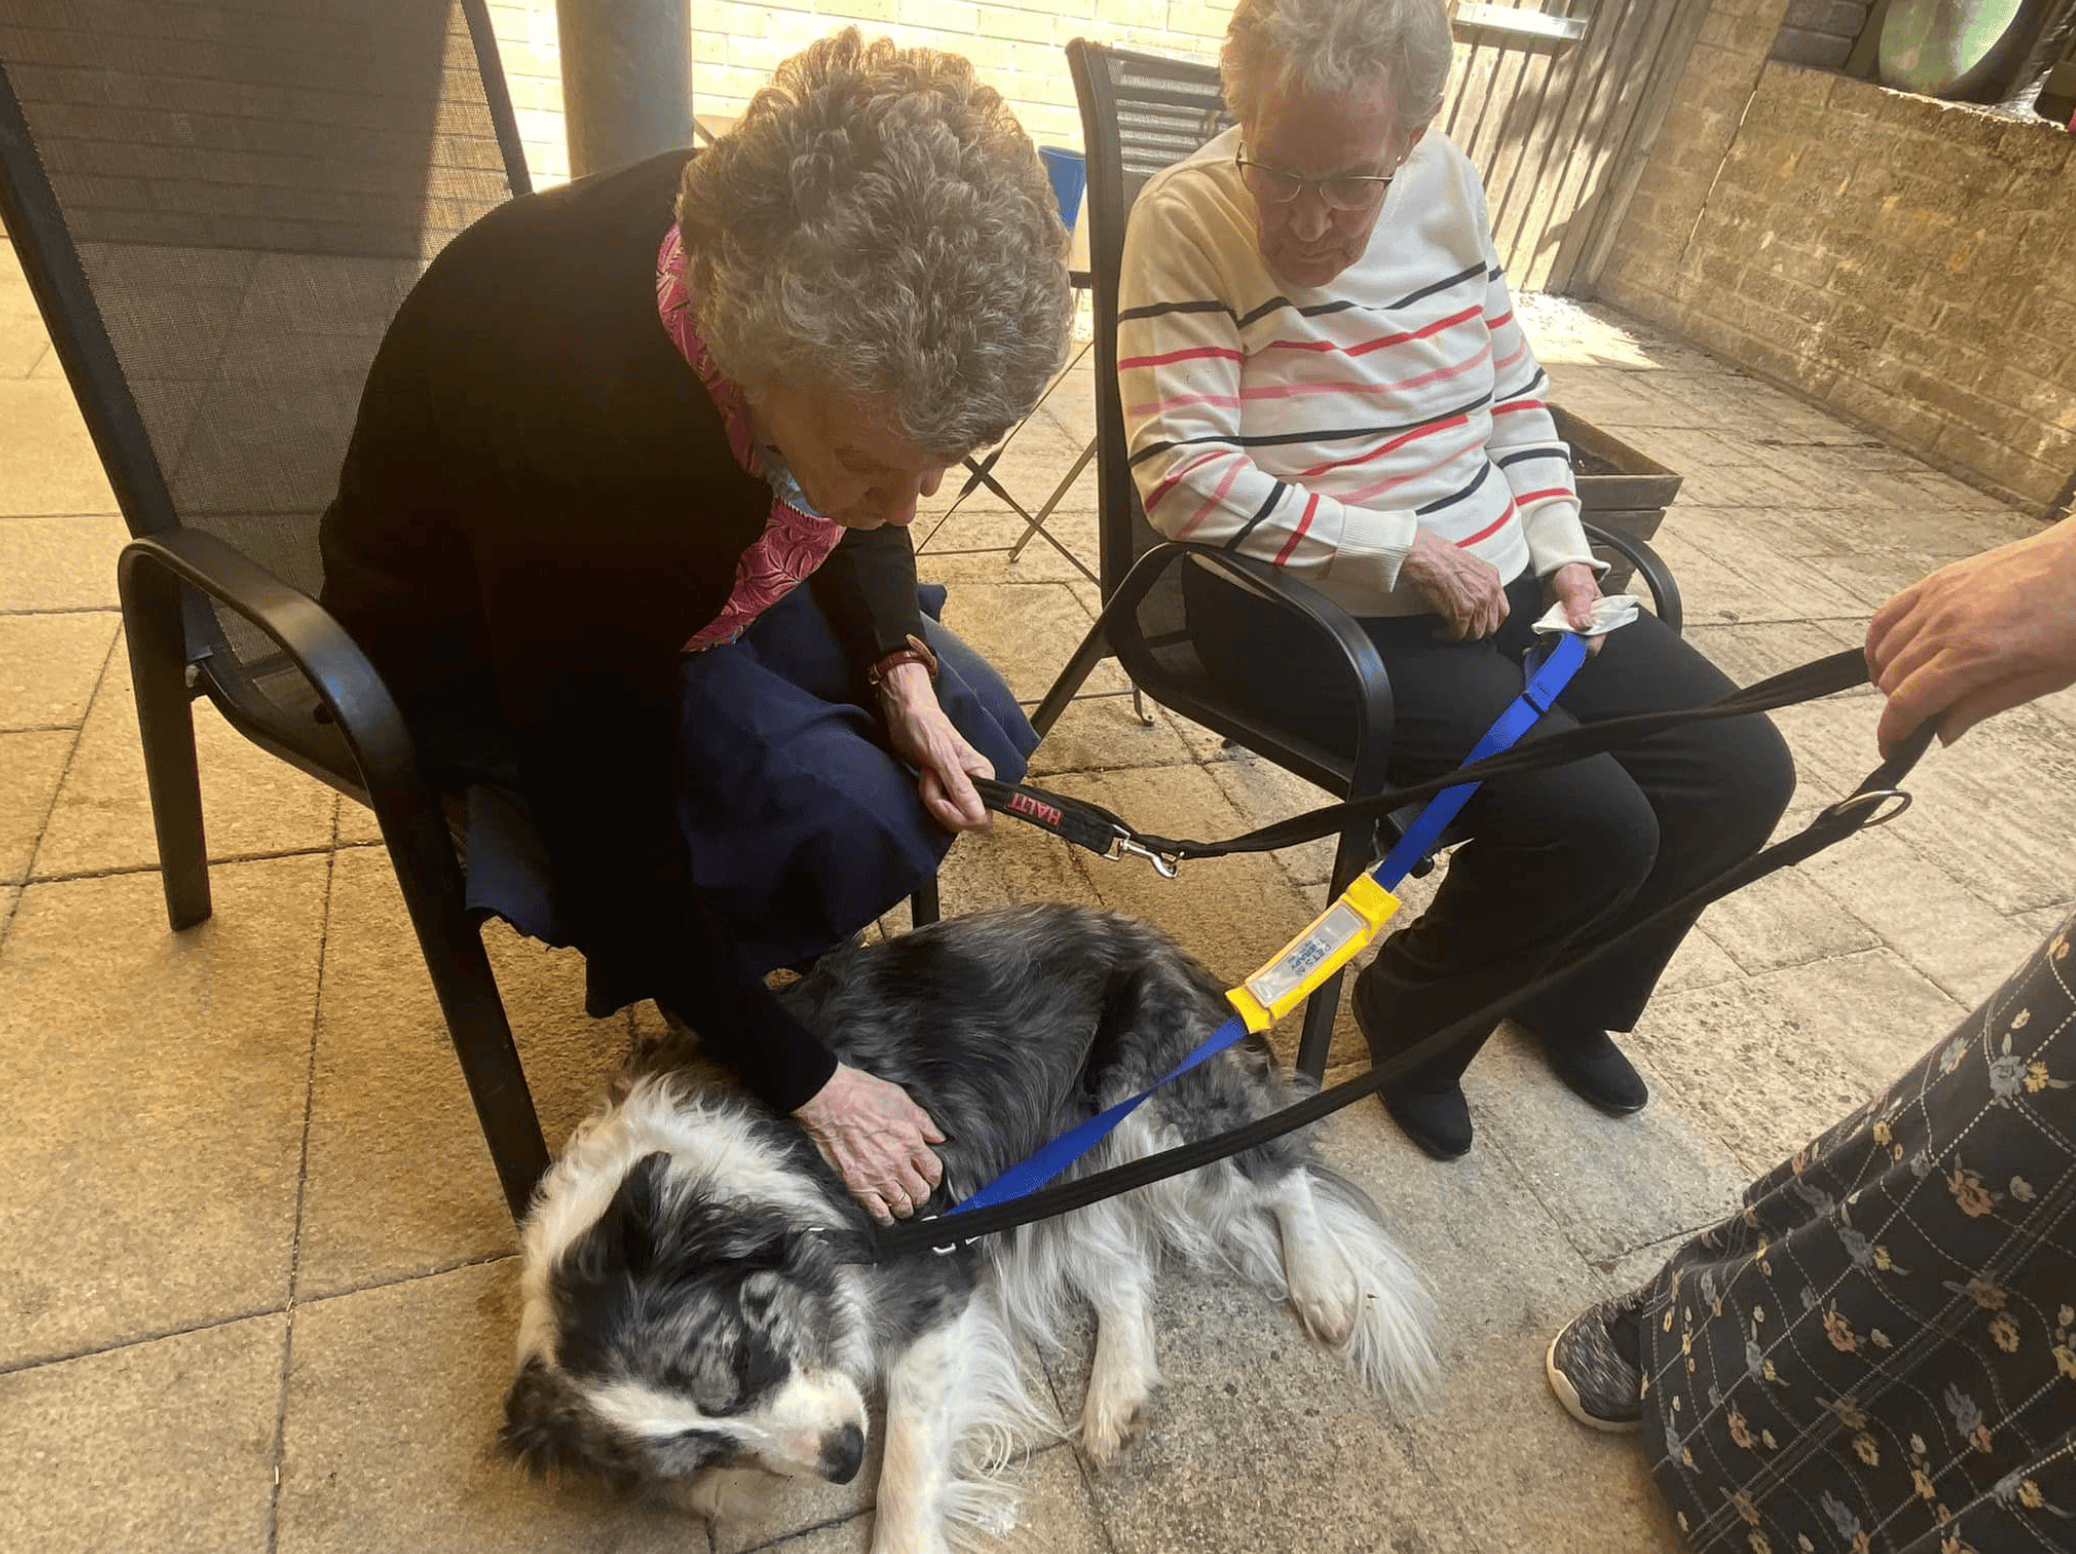 Pets of Mossview care home in Lochgelly, Scotland